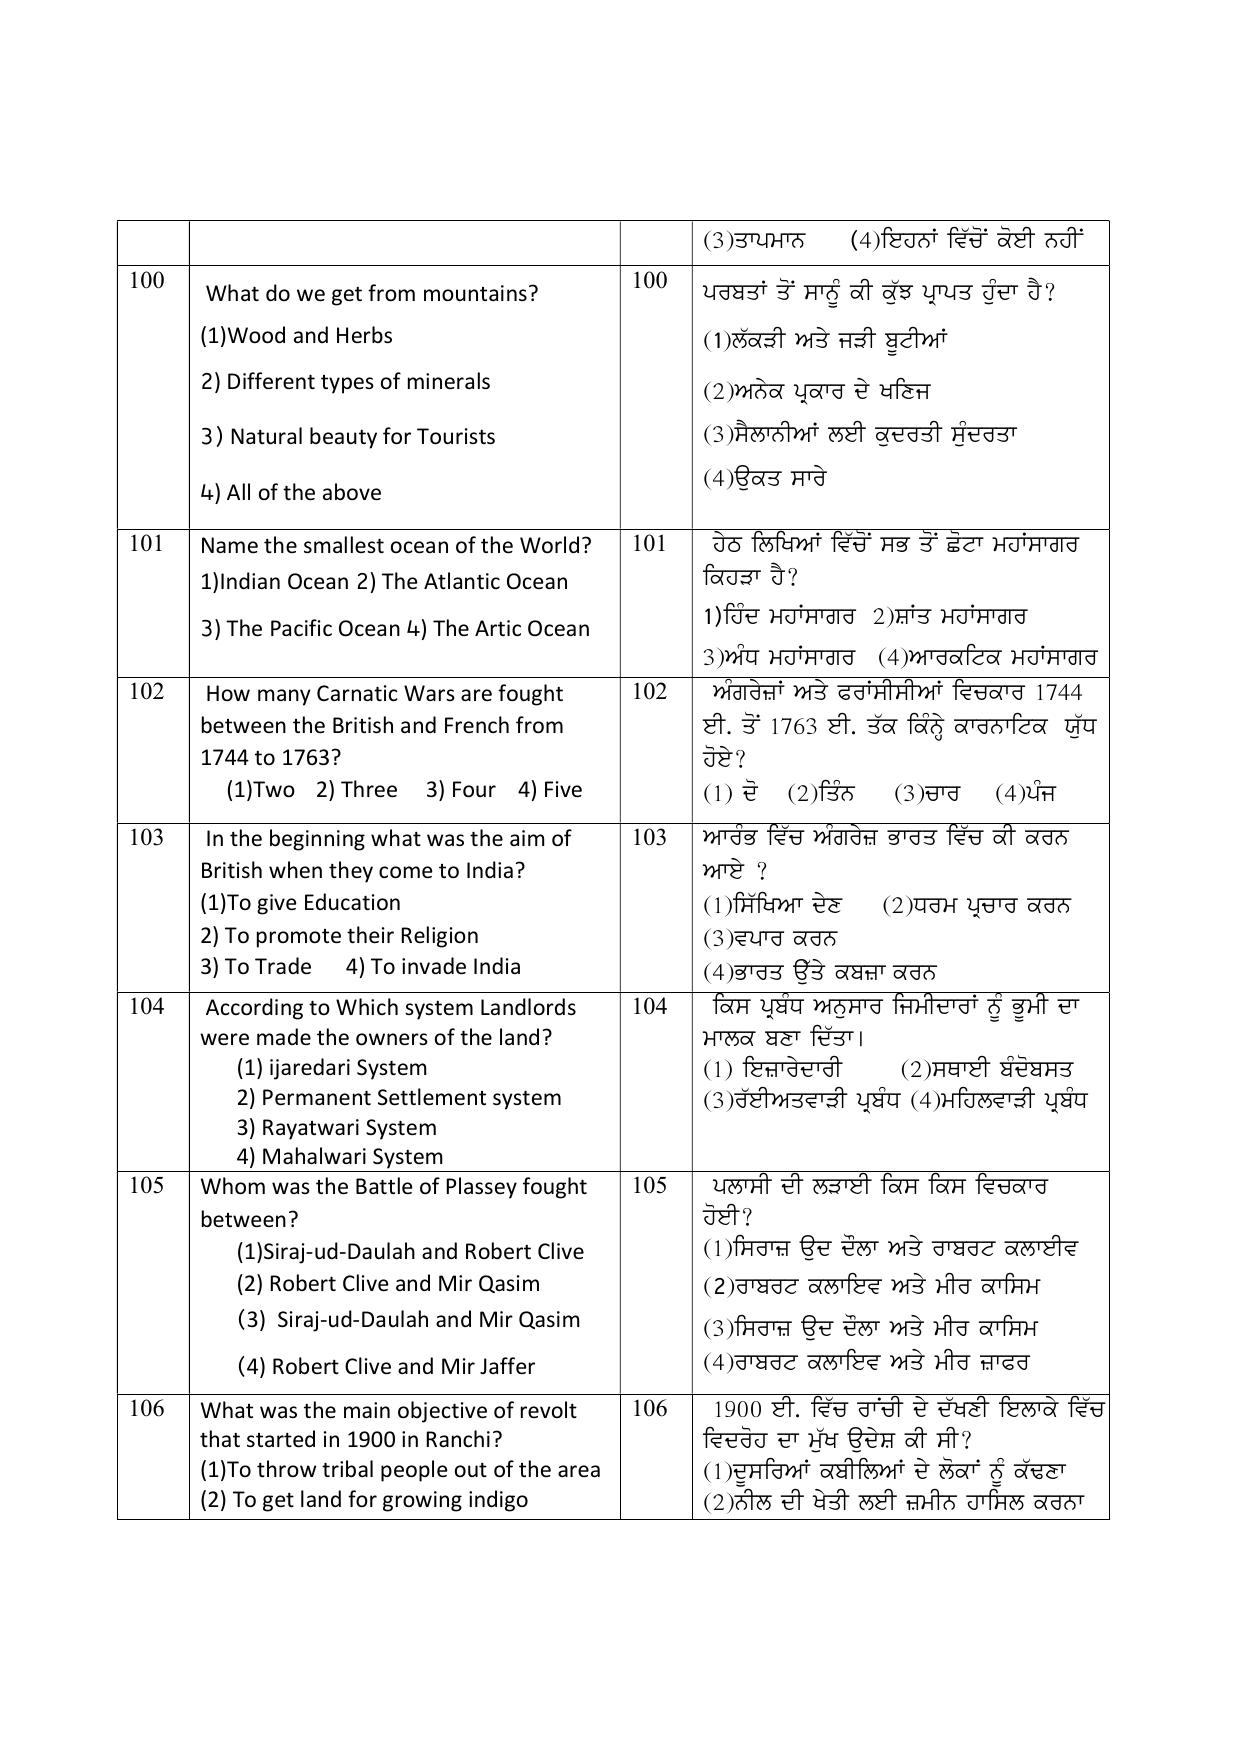 Punjab School of Eminence Class 9 Sample Question Paper - Page 18